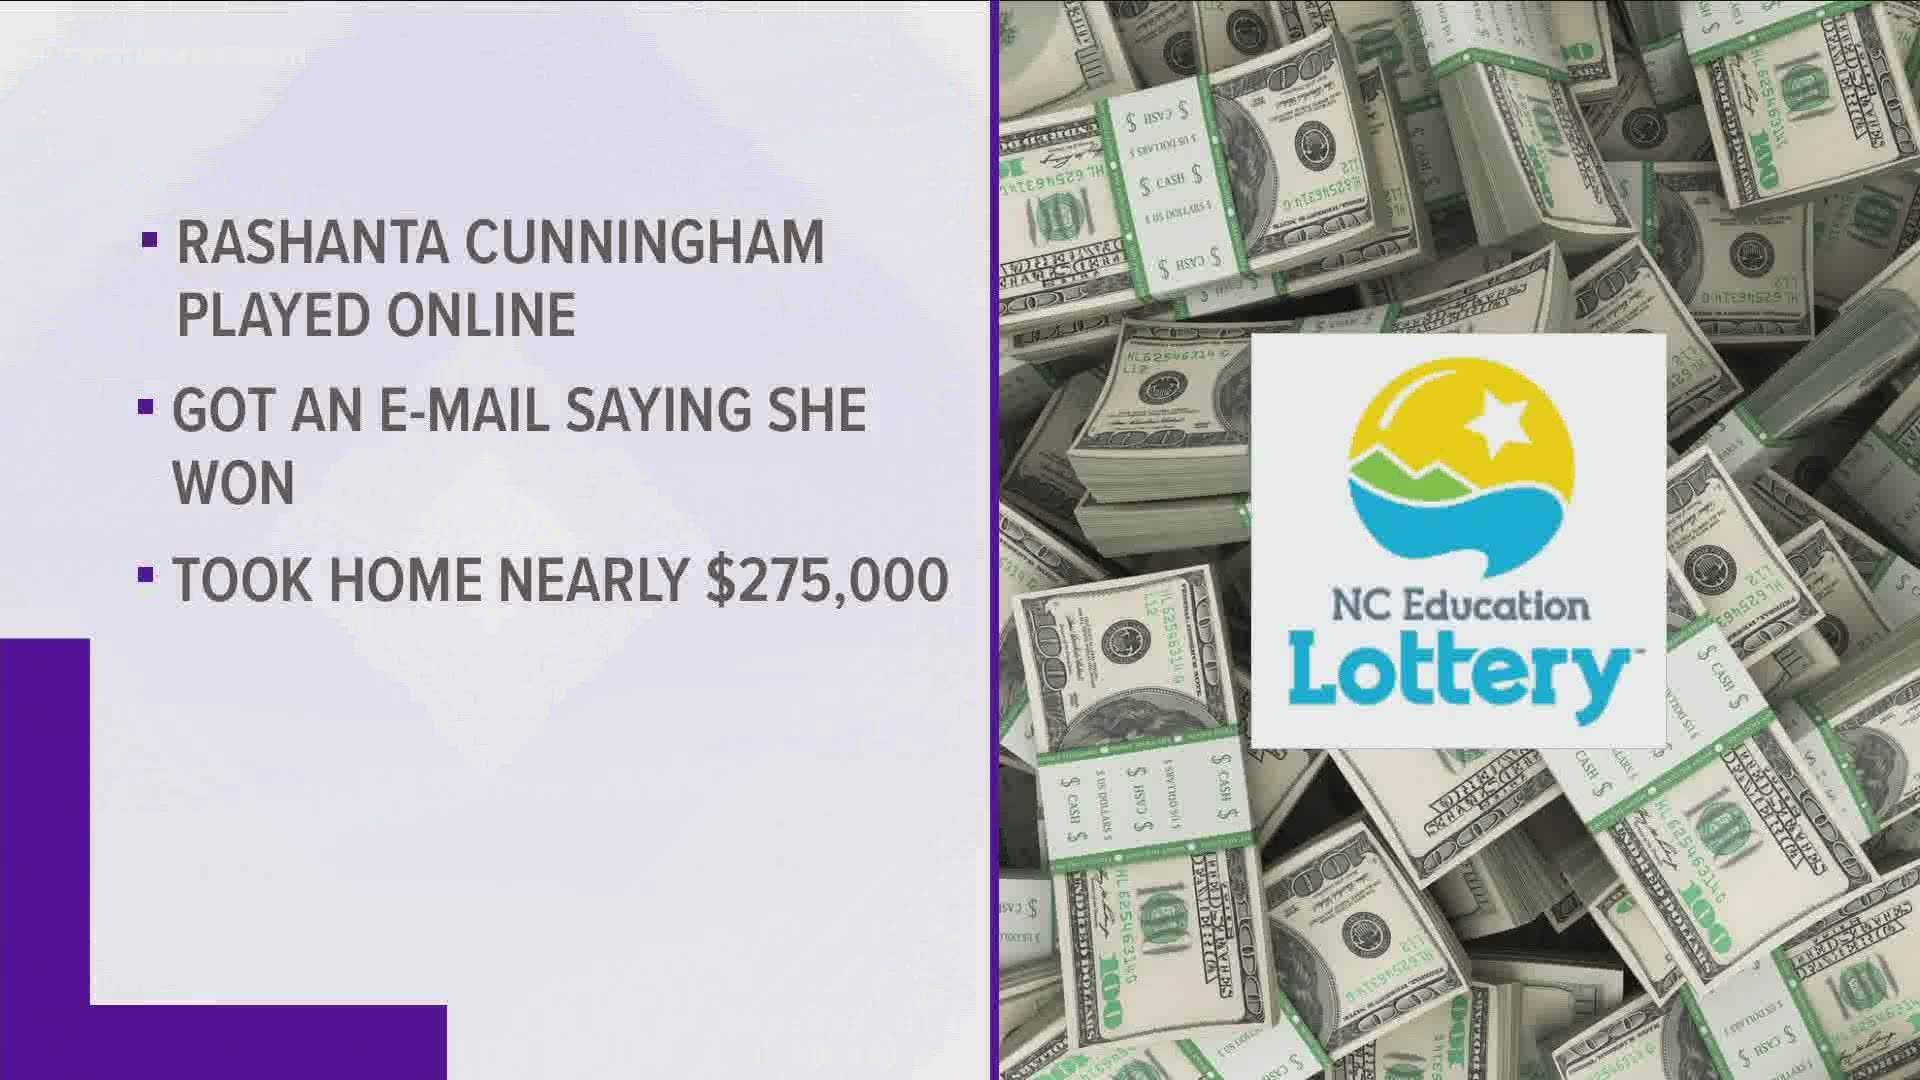 Rashanta Cunningham bought her Cash 5 ticket online. As a result, she found out she won the jackpot in an email.